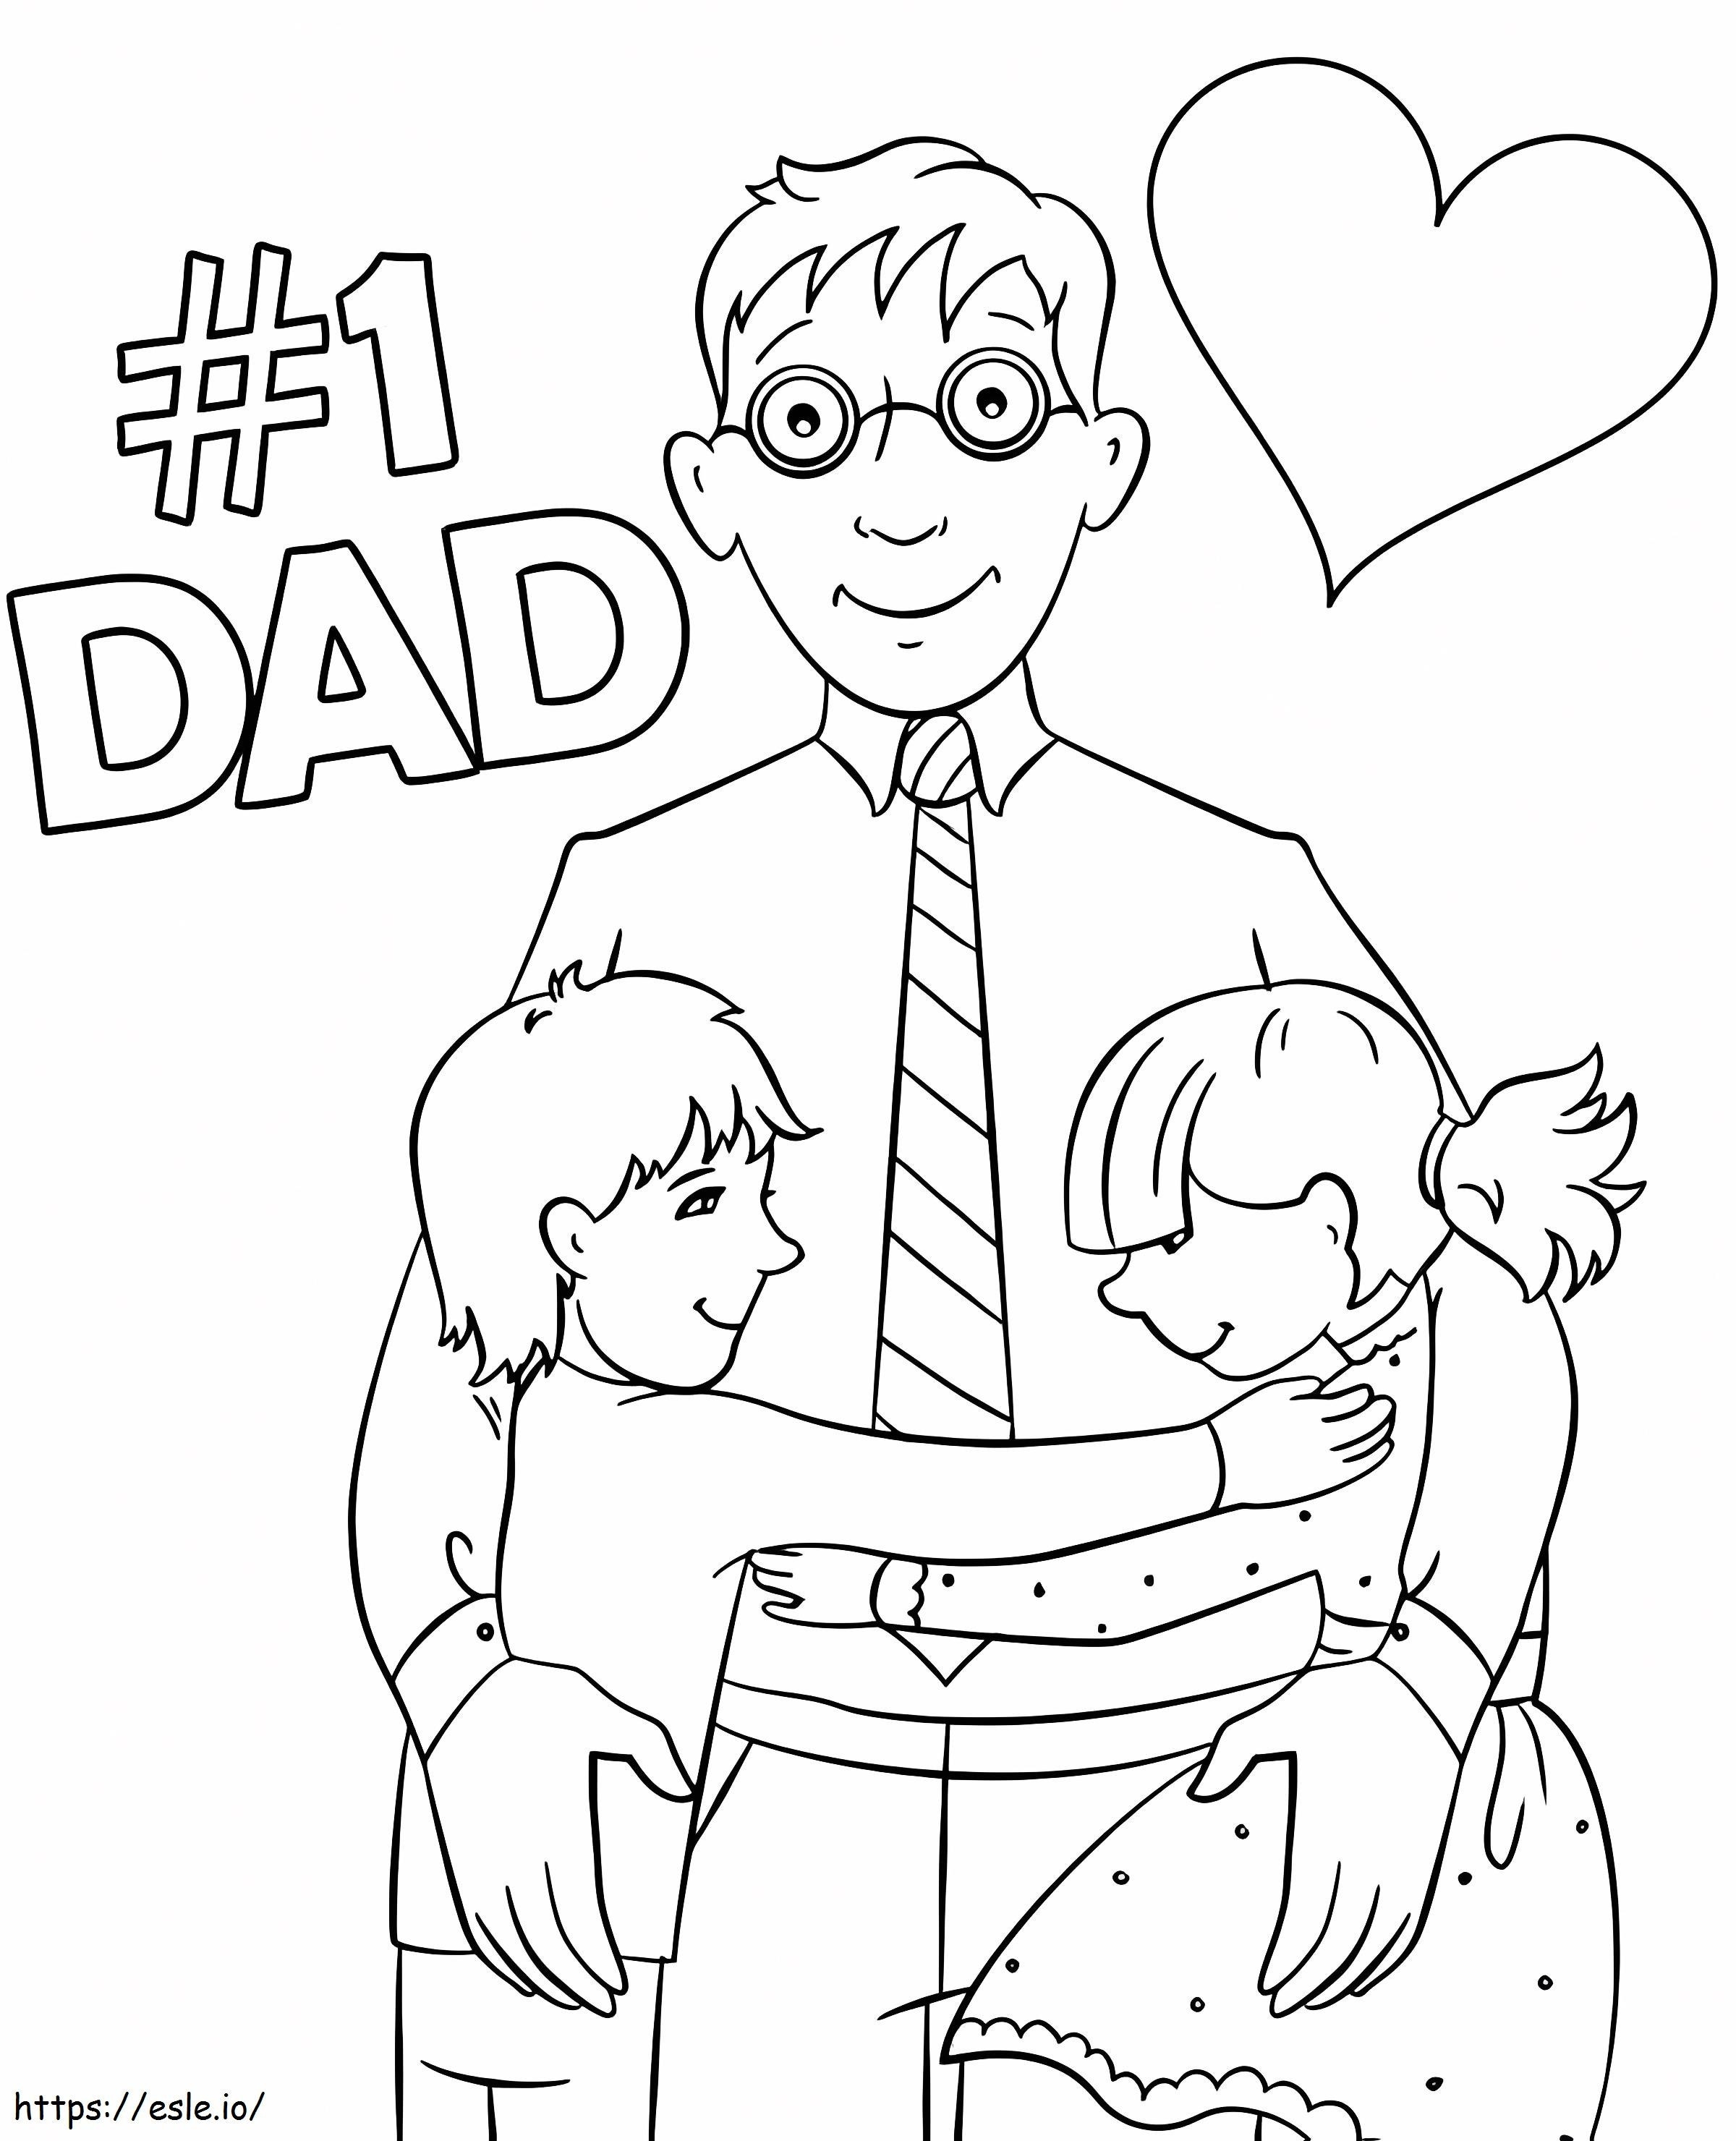 Dad And Children coloring page